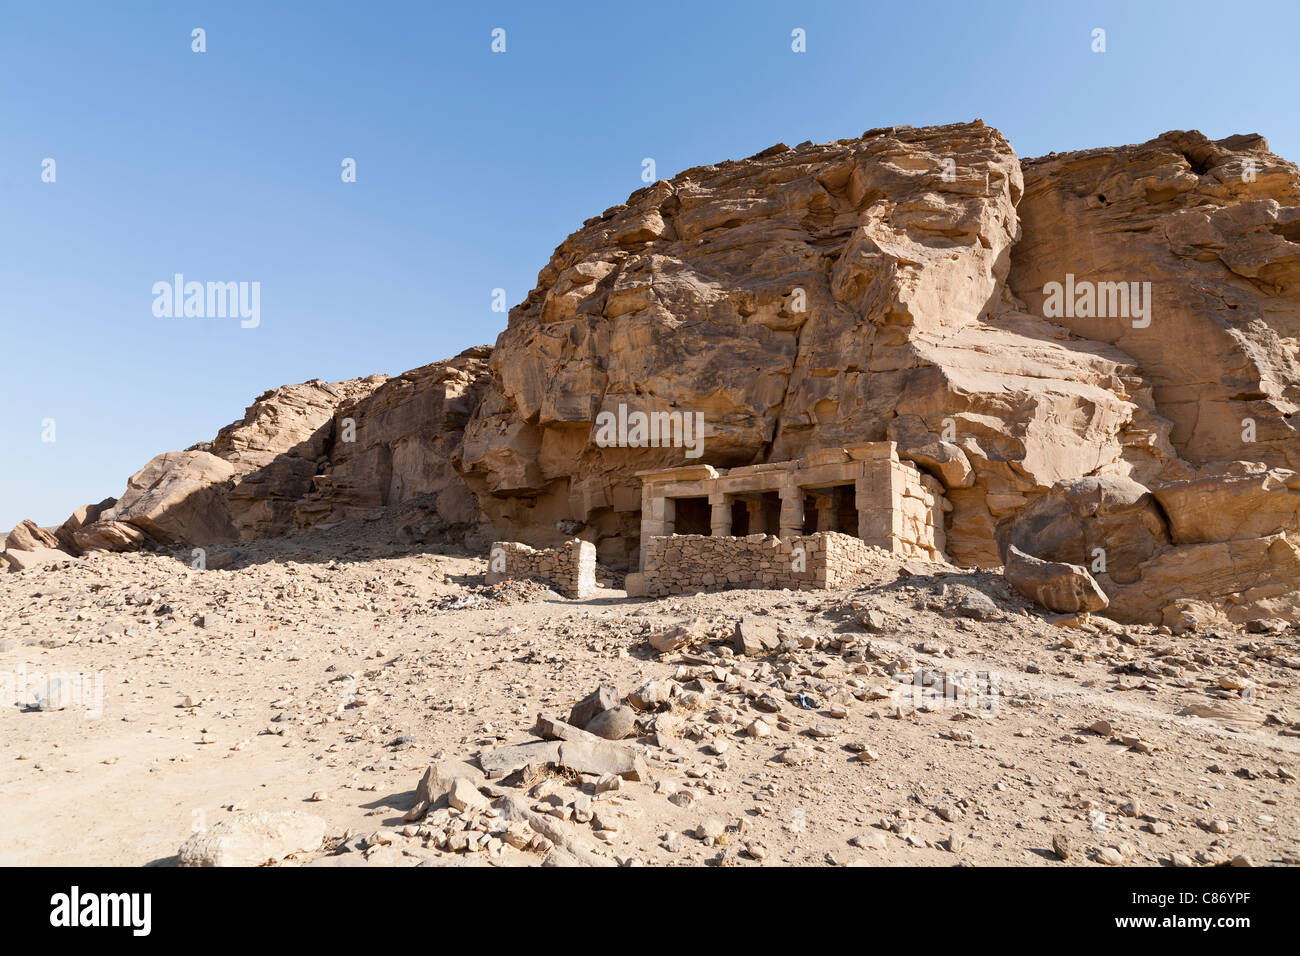 Kanais, Temple of King Seti 1 in the Wadi Abad in the Eastern Desert of Egypt Stock Photo